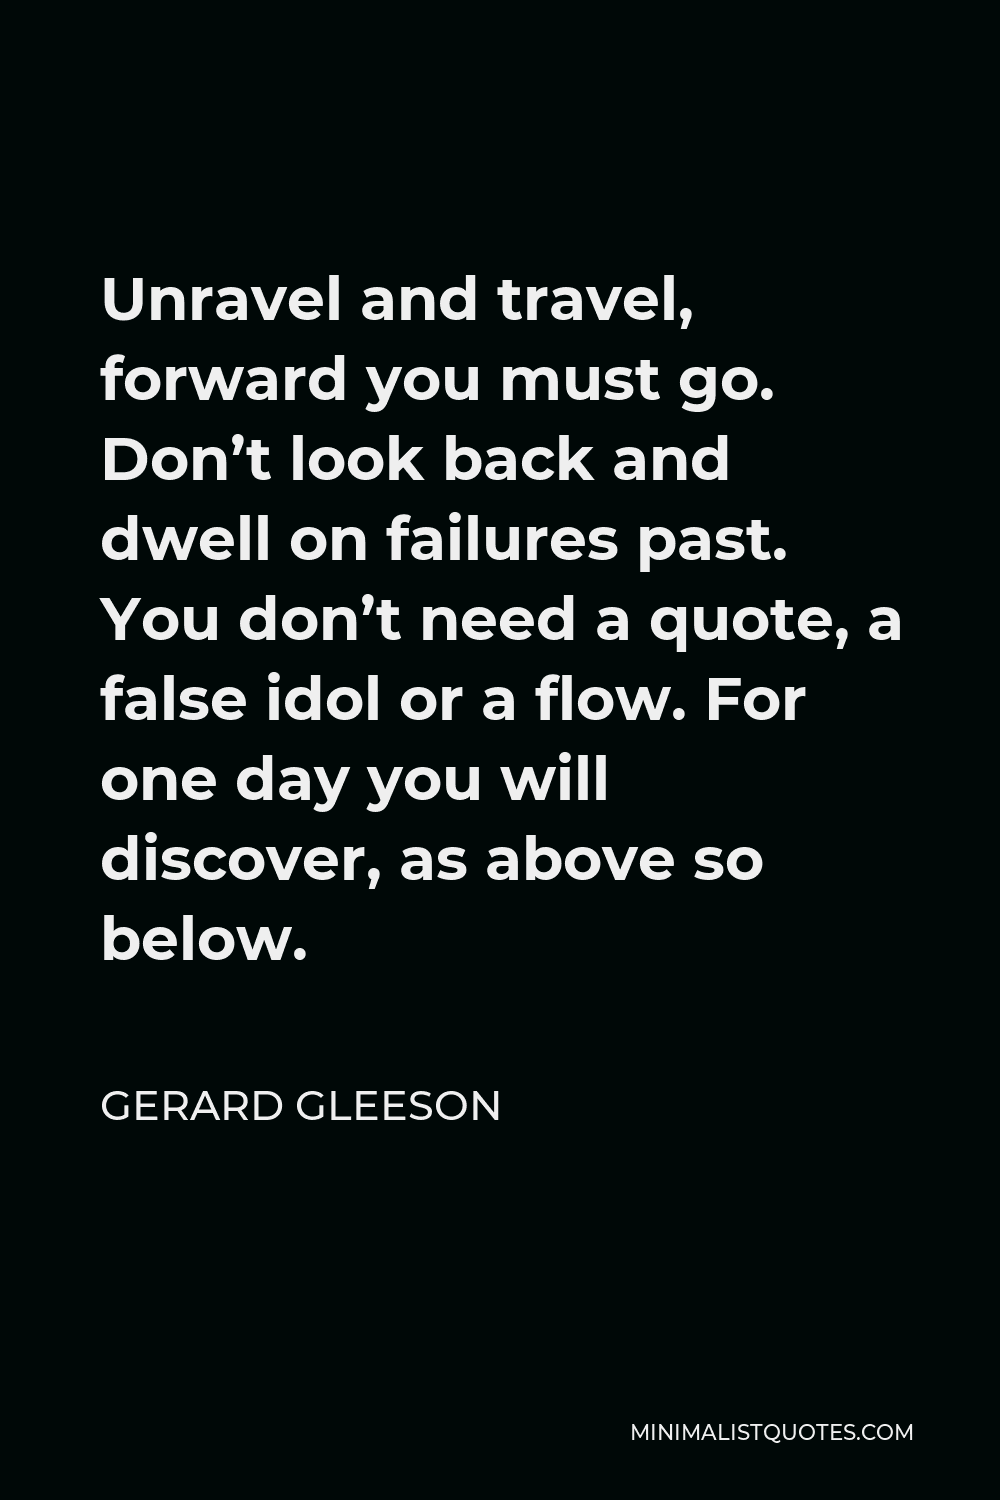 Gerard Gleeson Quote - Unravel and travel, forward you must go. Don’t look back and dwell on failures past. You don’t need a quote, a false idol or a flow. For one day you will discover, as above so below.